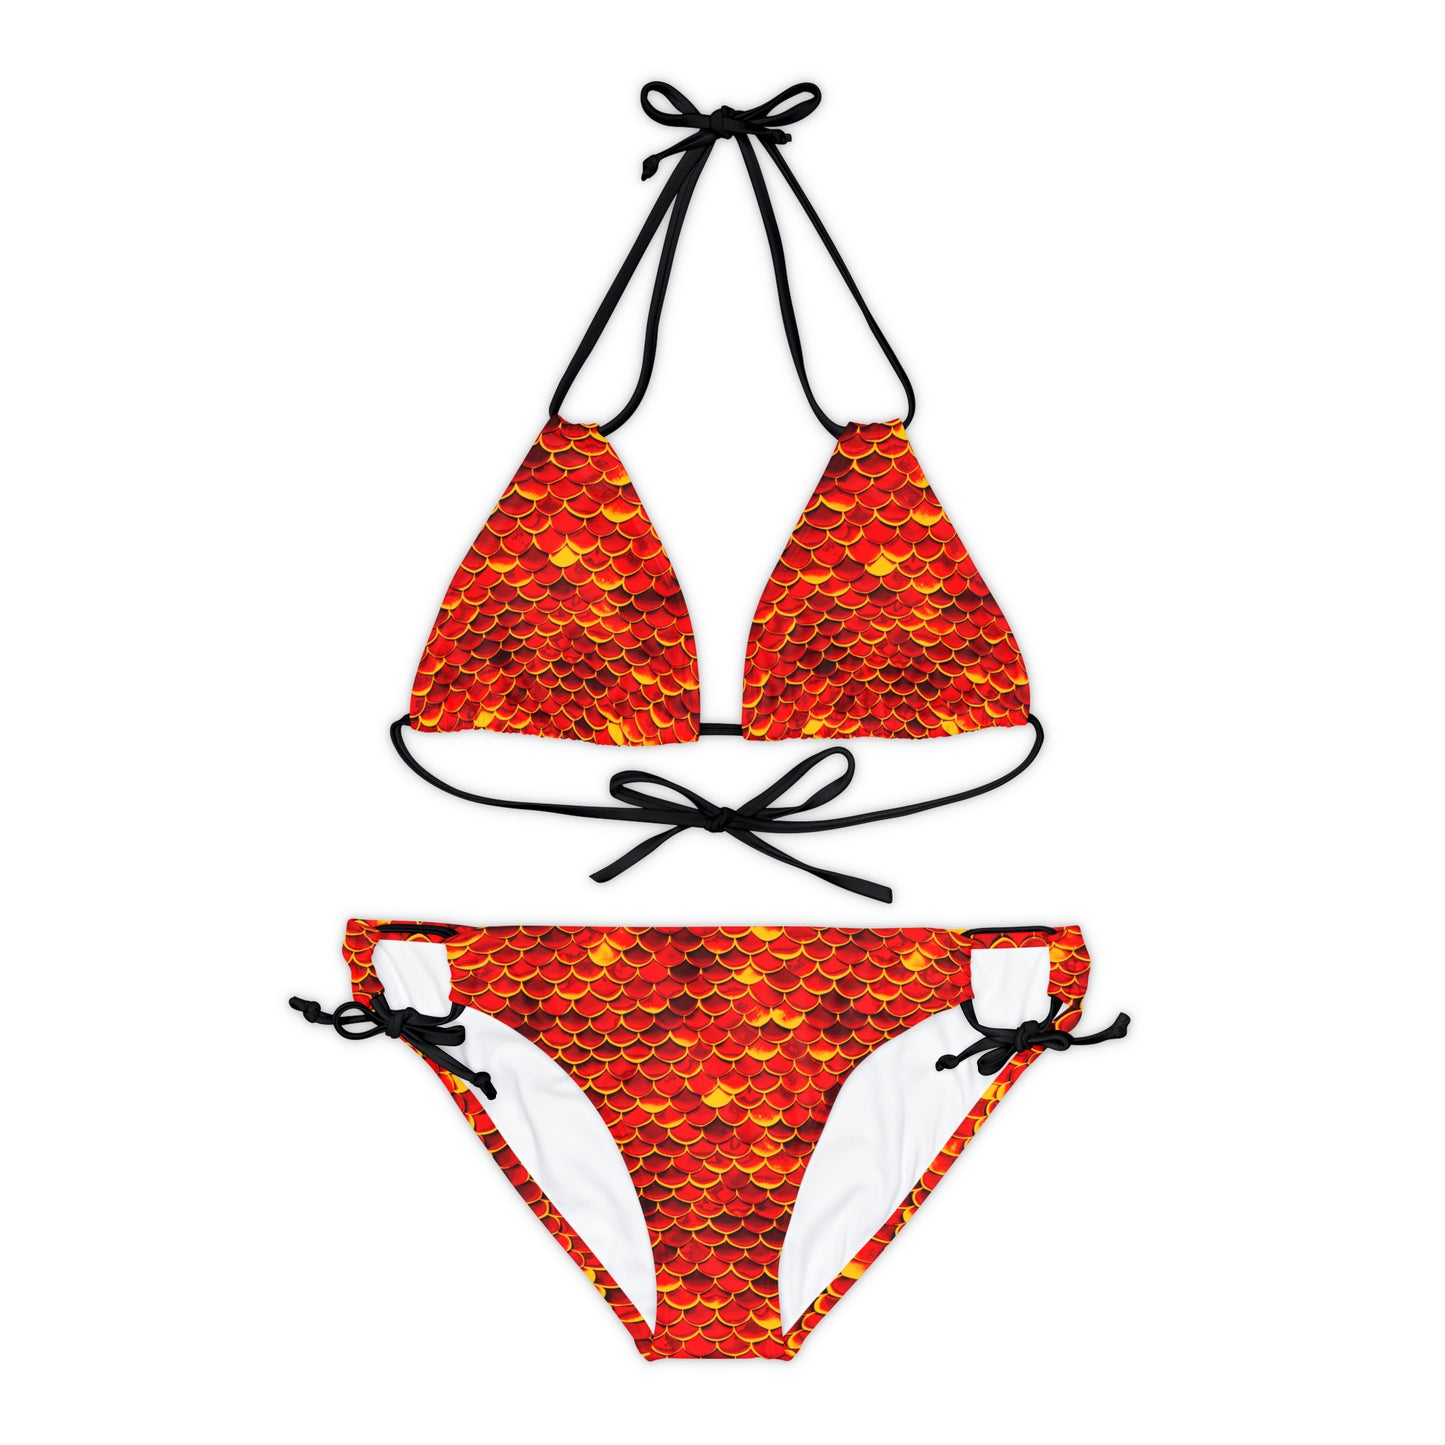 Red Little Mermaid Ariel Inspired Bikini Set, Charming Ocean-Inspired Fashion with Fish Scale Designs! Women's Top & Bottom Swimsuit